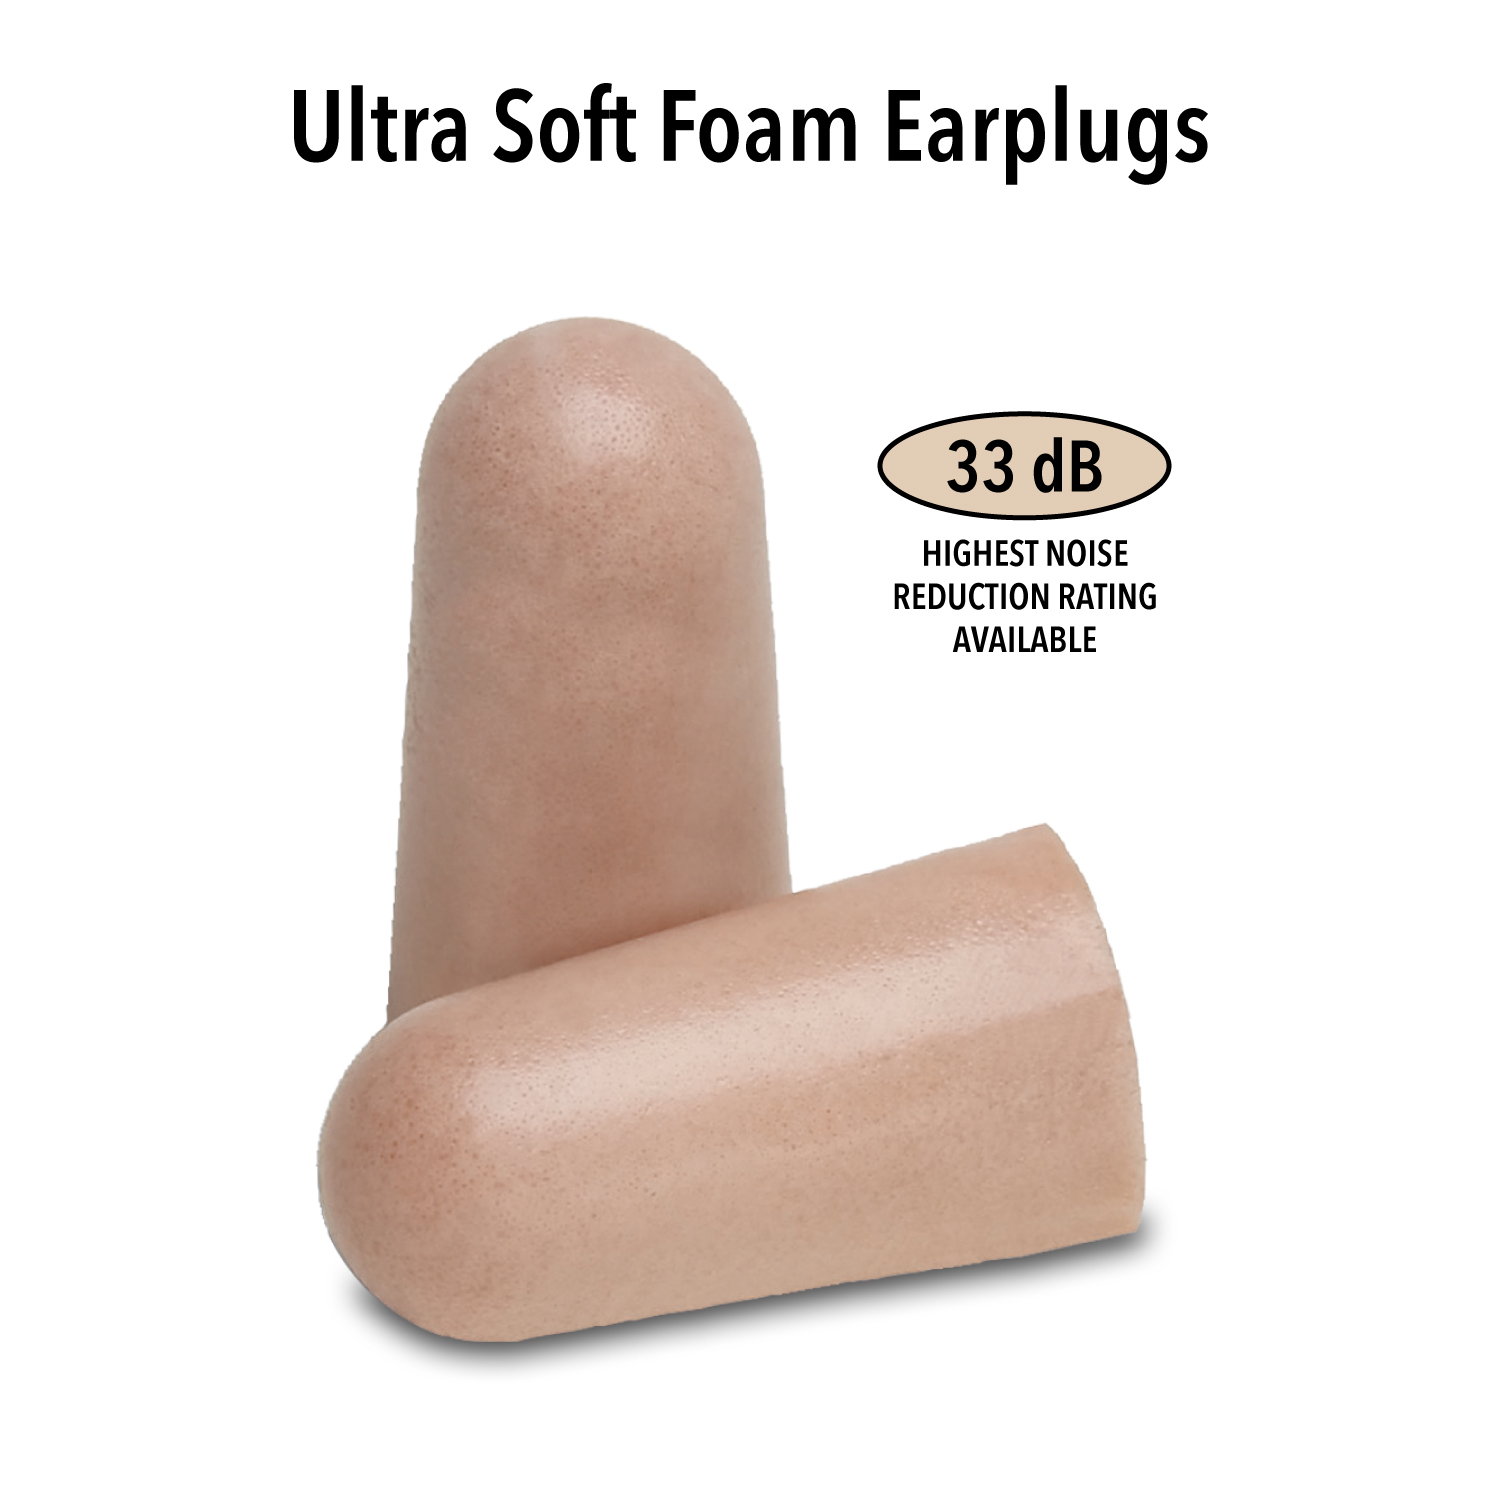 Mack's Ultra Soft Foam Earplugs, 50 Pair - 33dB Highest NRR, Comfortable Ear Plugs for Sleeping, Snoring, Travel, Concerts, Studying, Loud Noise, Work | Made in USA - image 3 of 8